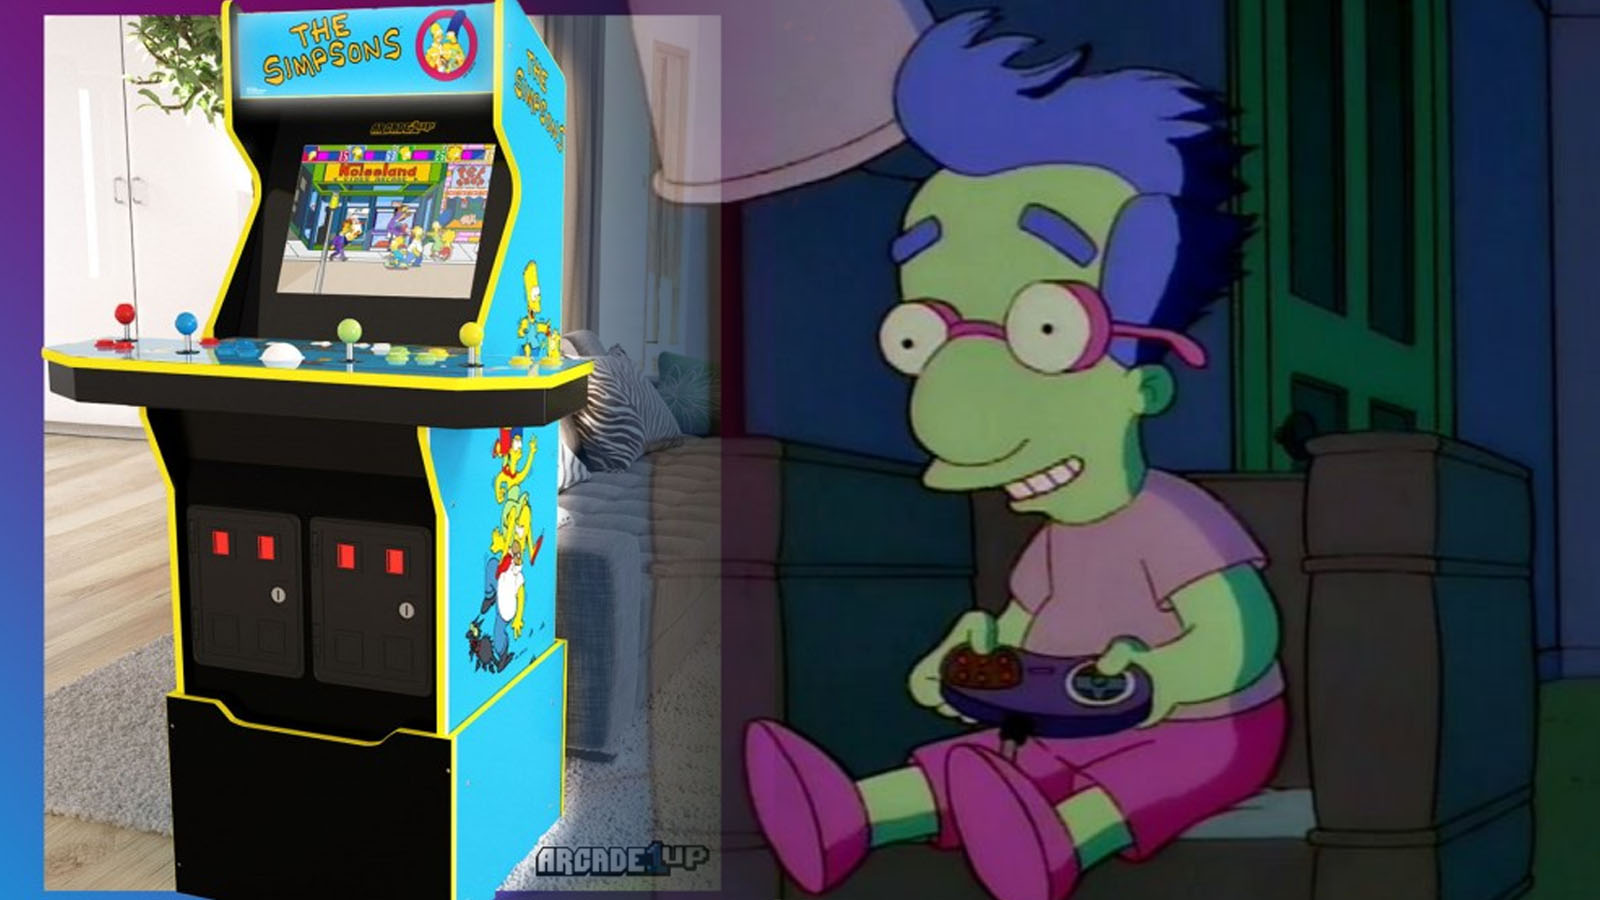 You Can Now Buy A Giant Simpsons Arcade Machine.